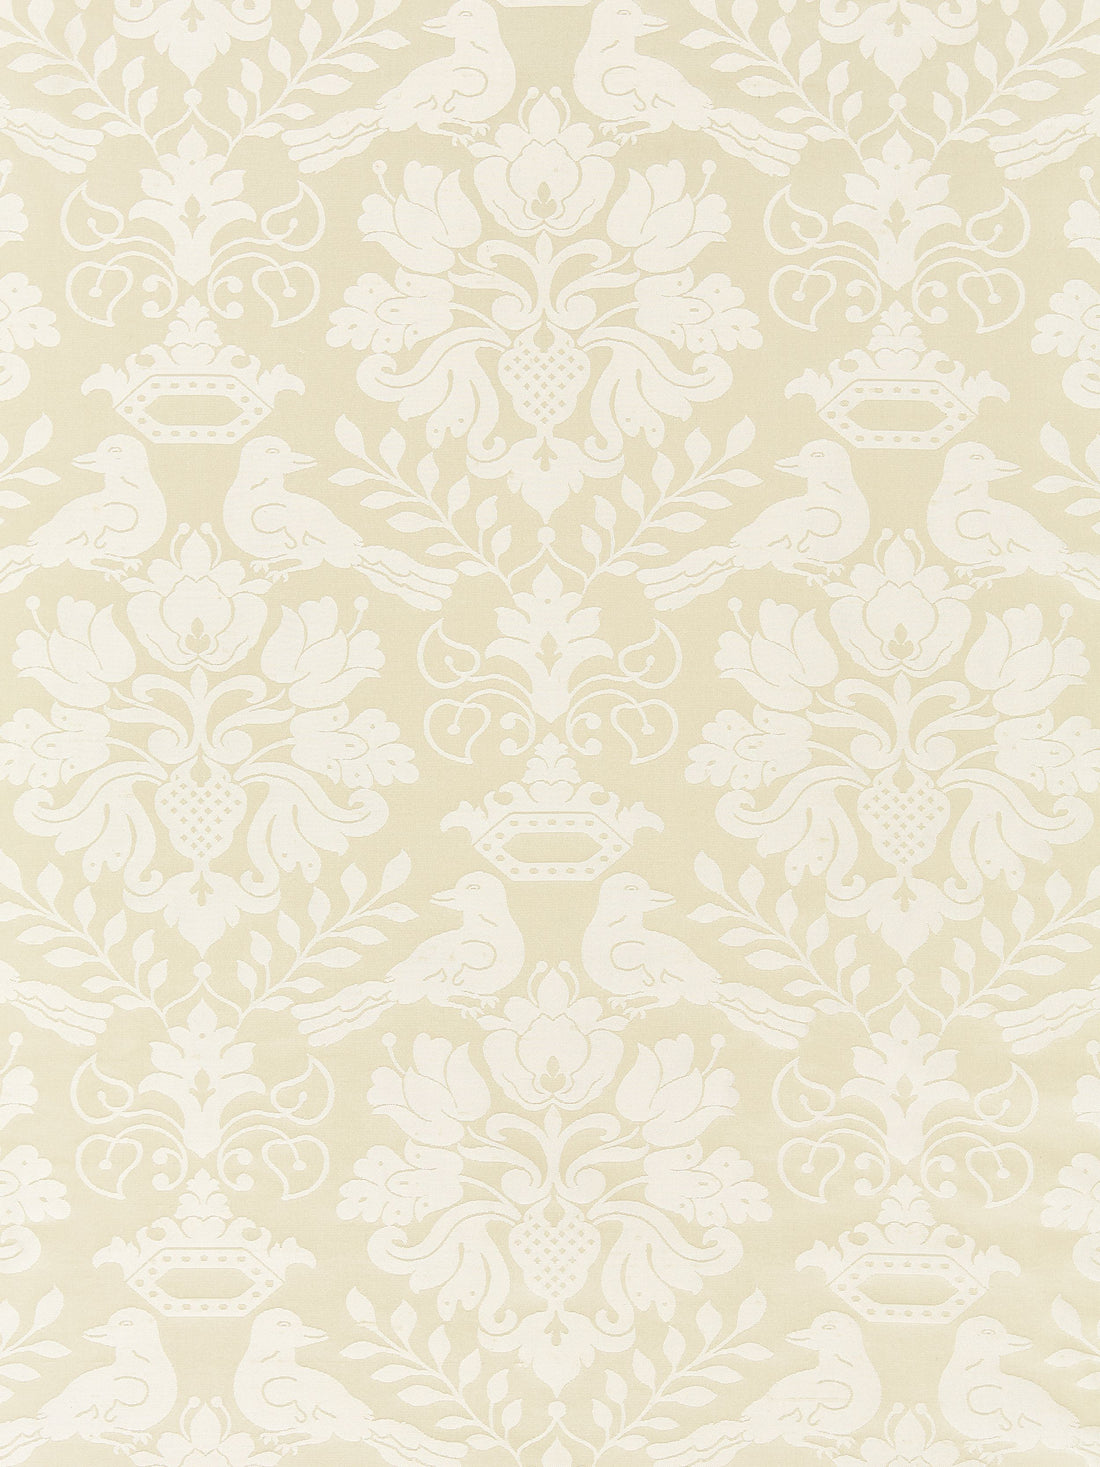 Love Bird fabric in creme color - pattern number SC 00011098MM - by Scalamandre in the Scalamandre Fabrics Book 1 collection